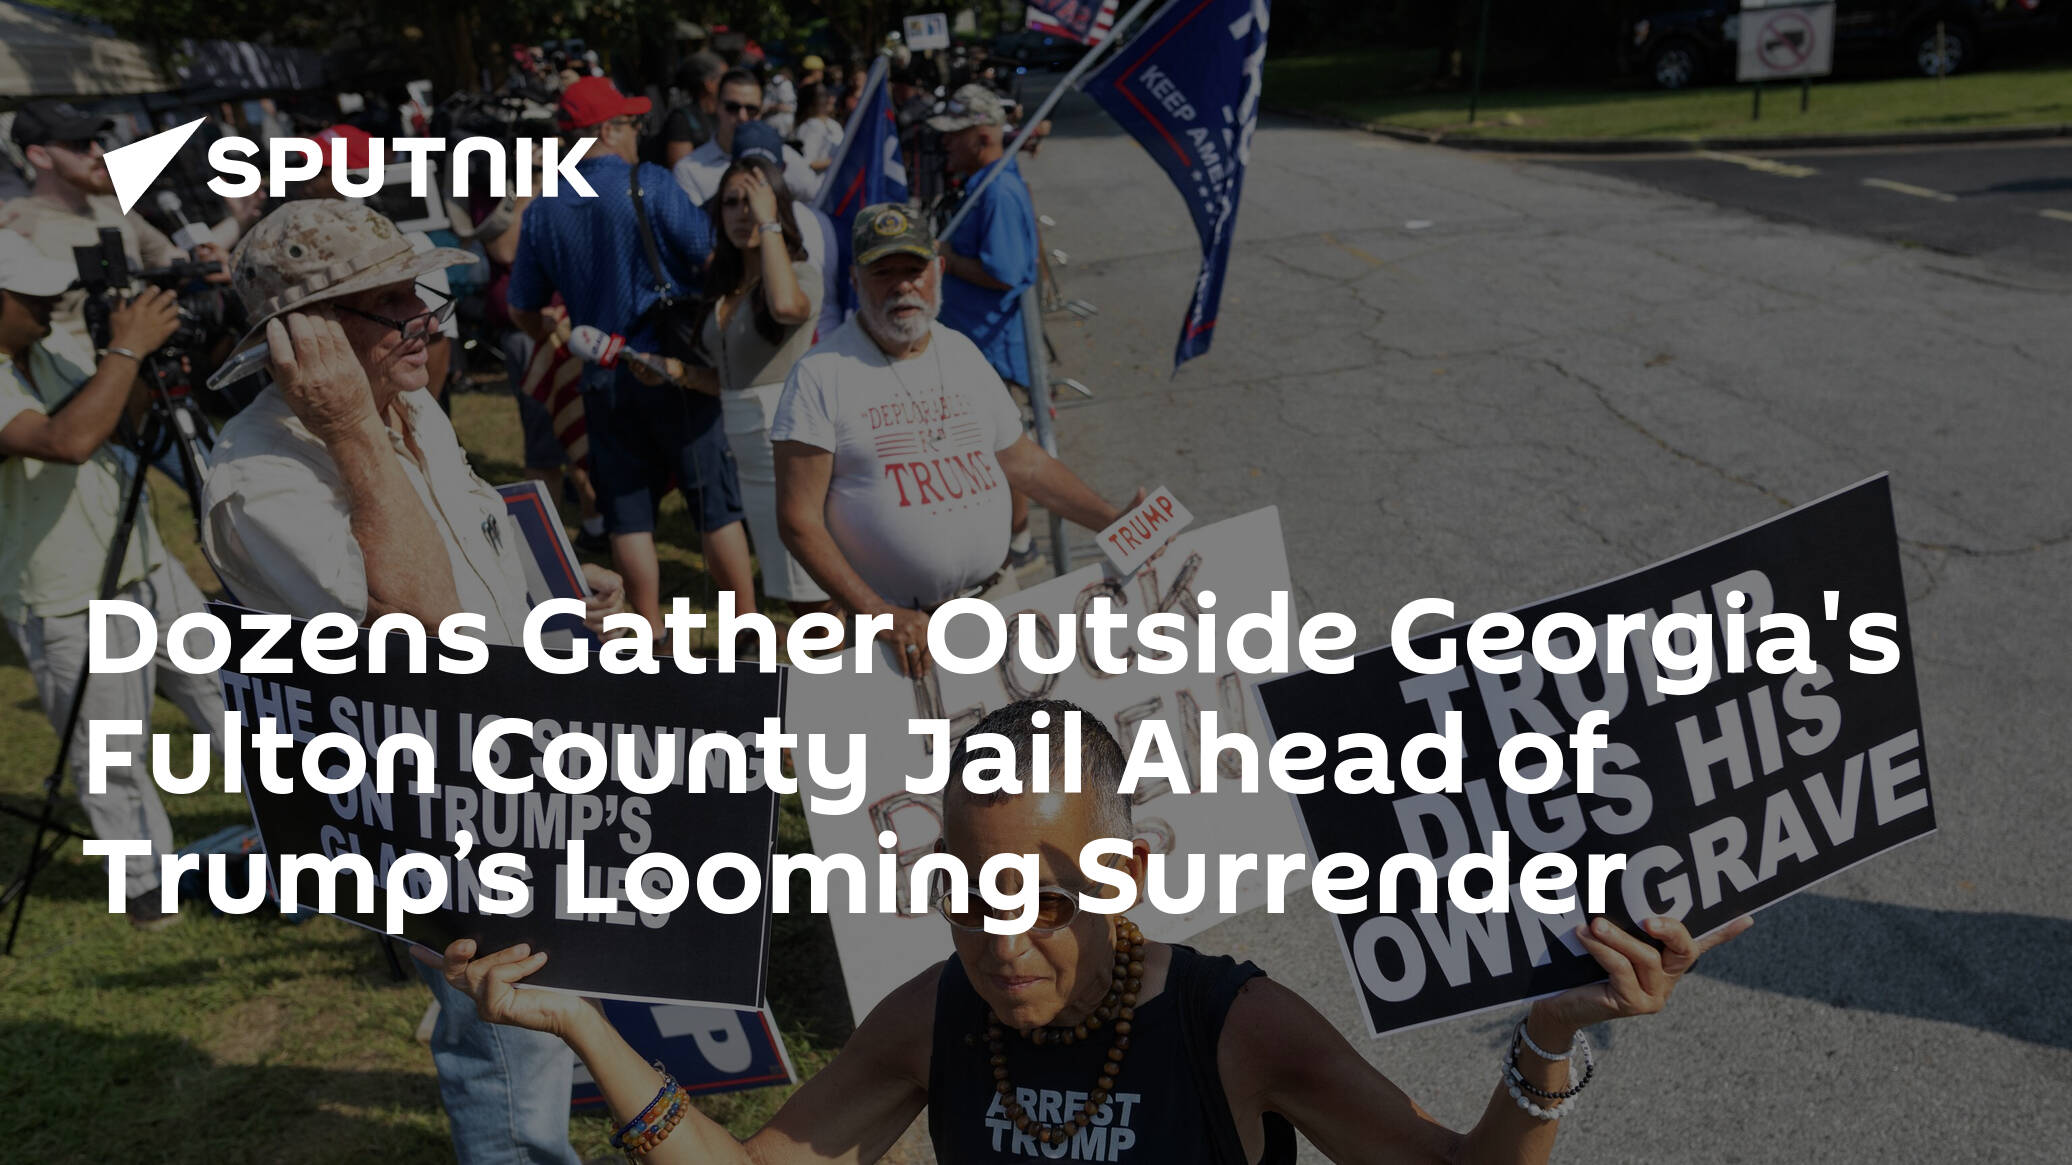 Dozens Gather Outside Georgia's Fulton County Jail Ahead of Trump’s Looming Surrender